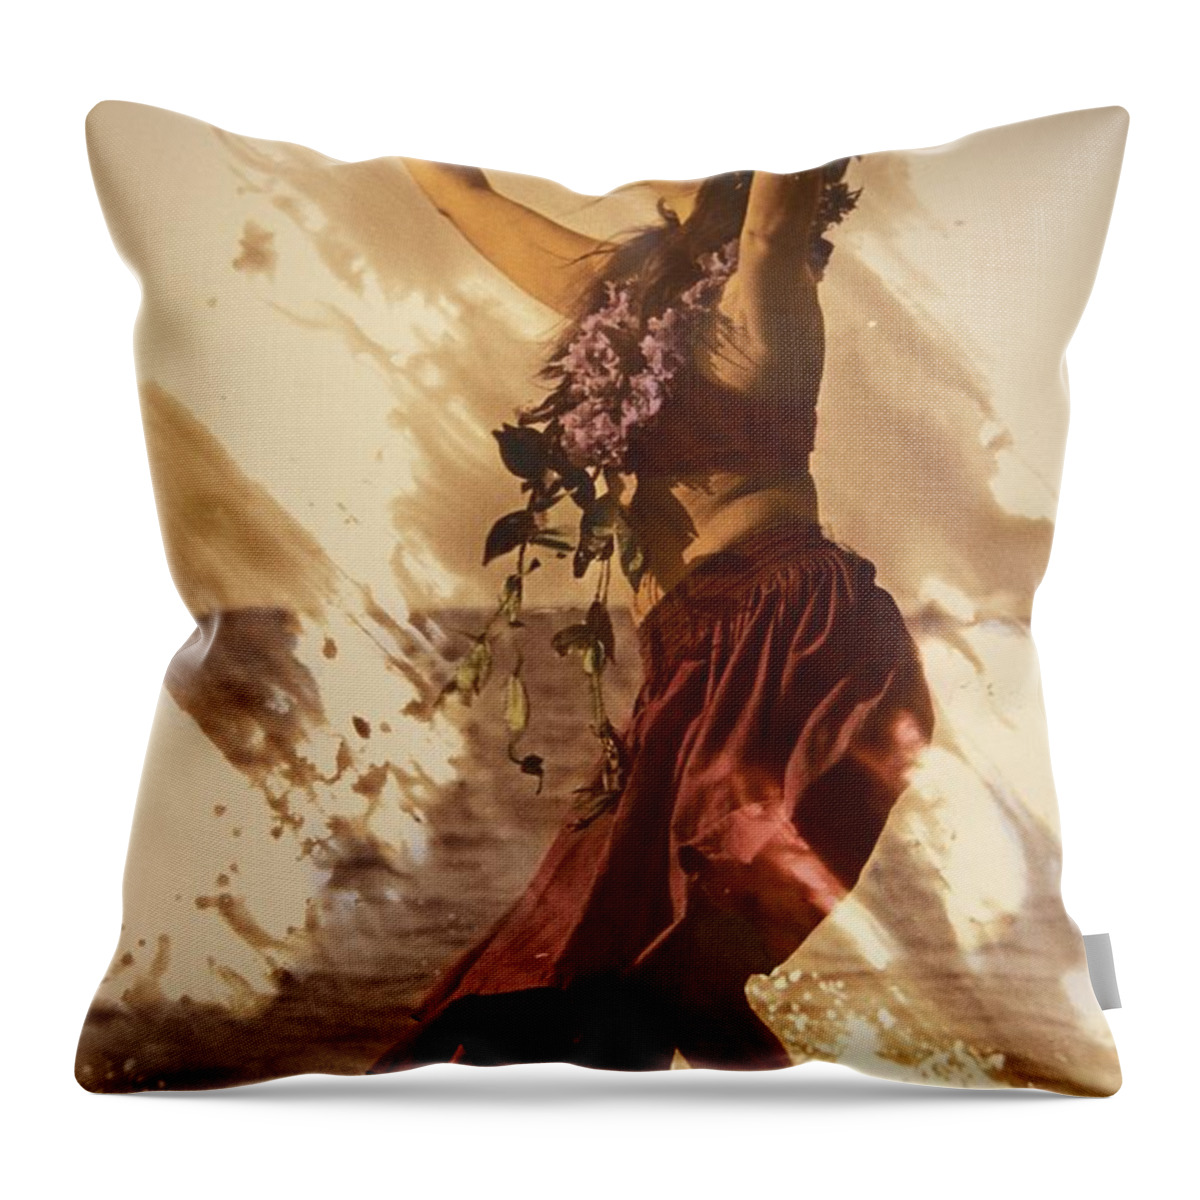 Beautiful Throw Pillow featuring the photograph Hula On The Beach #1 by Himani - Printscapes